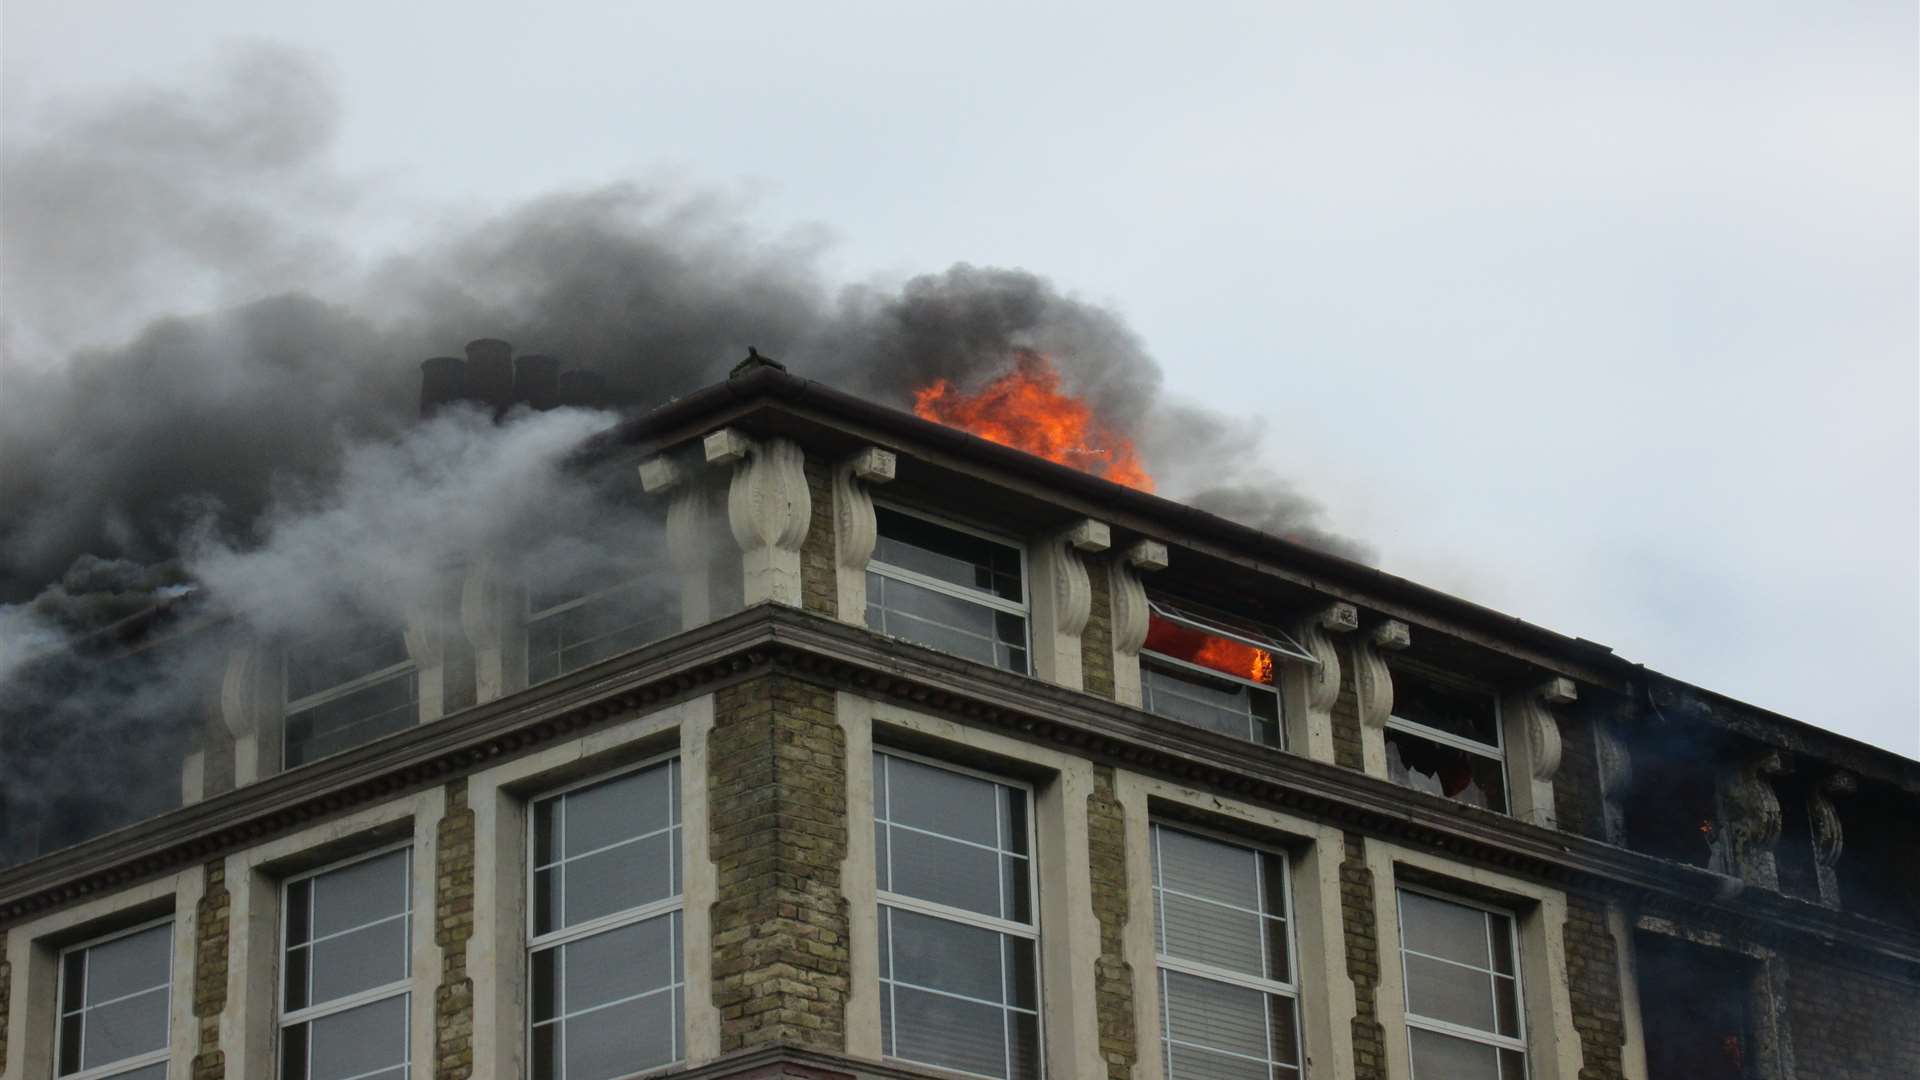 A close-up of the blazing building